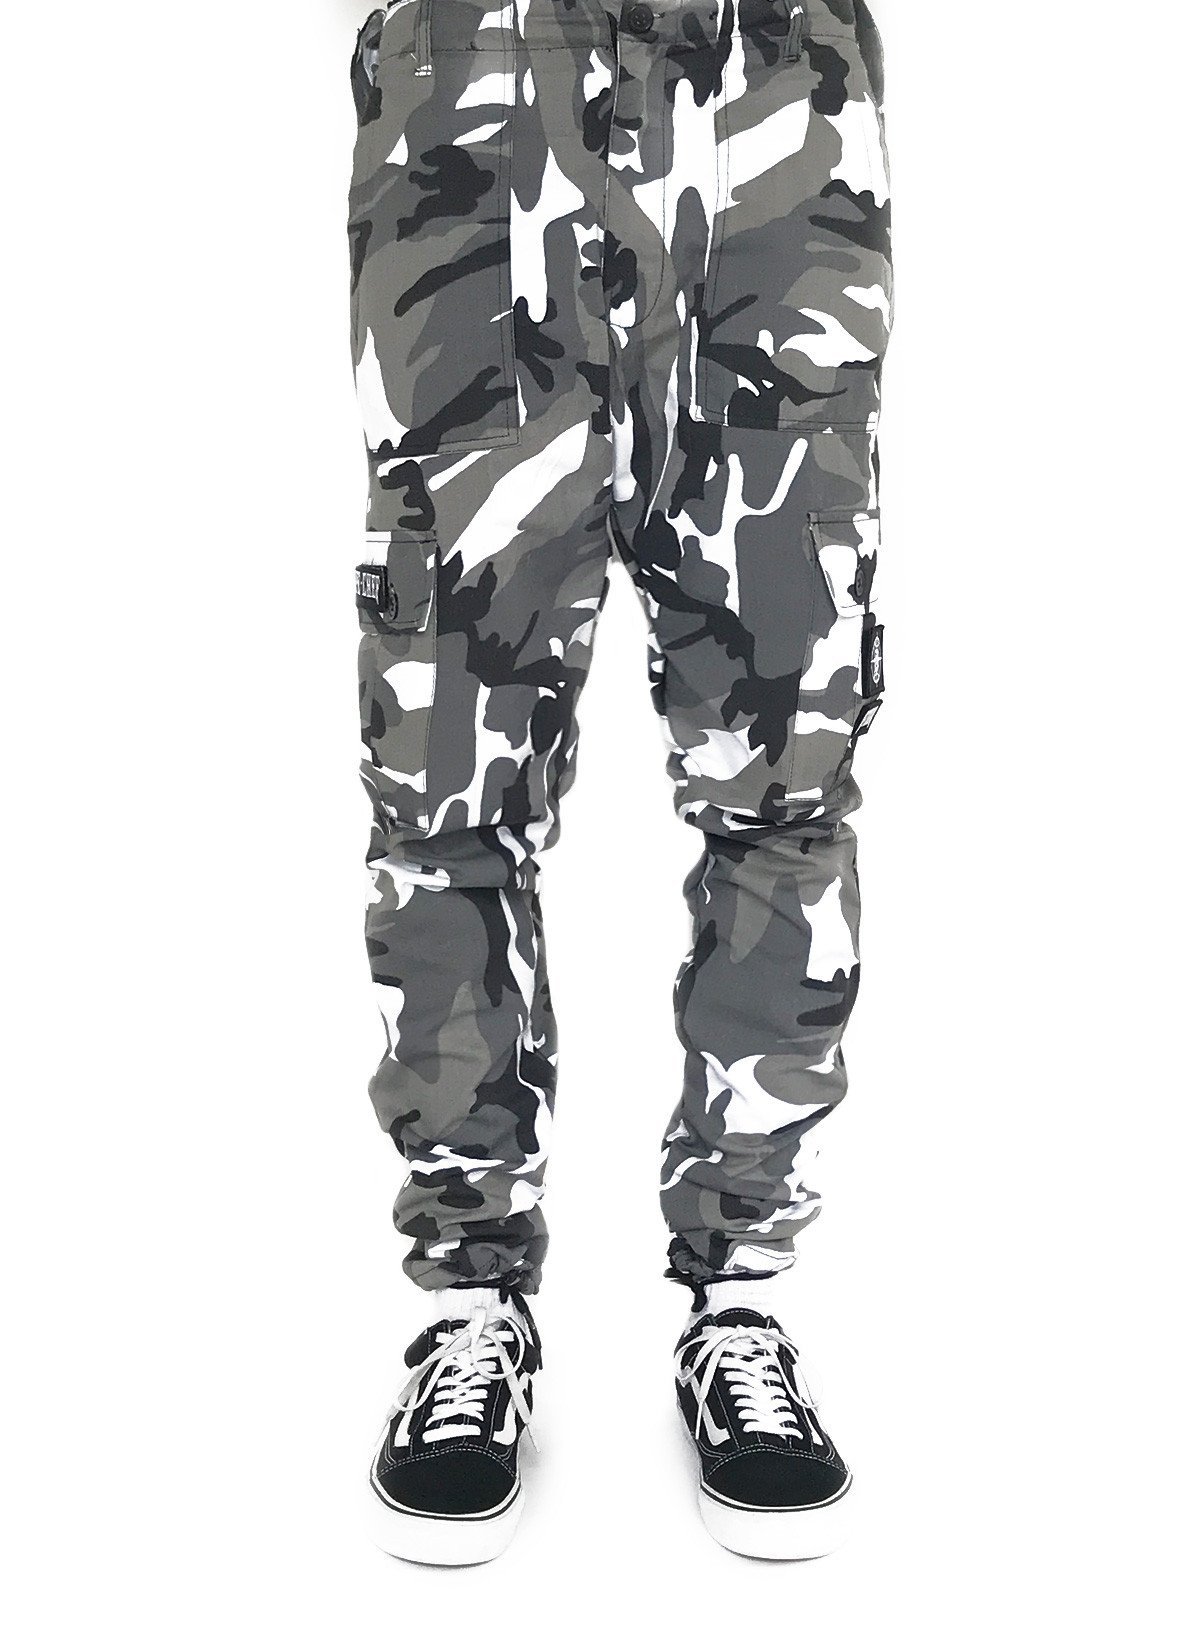 black and white army pants